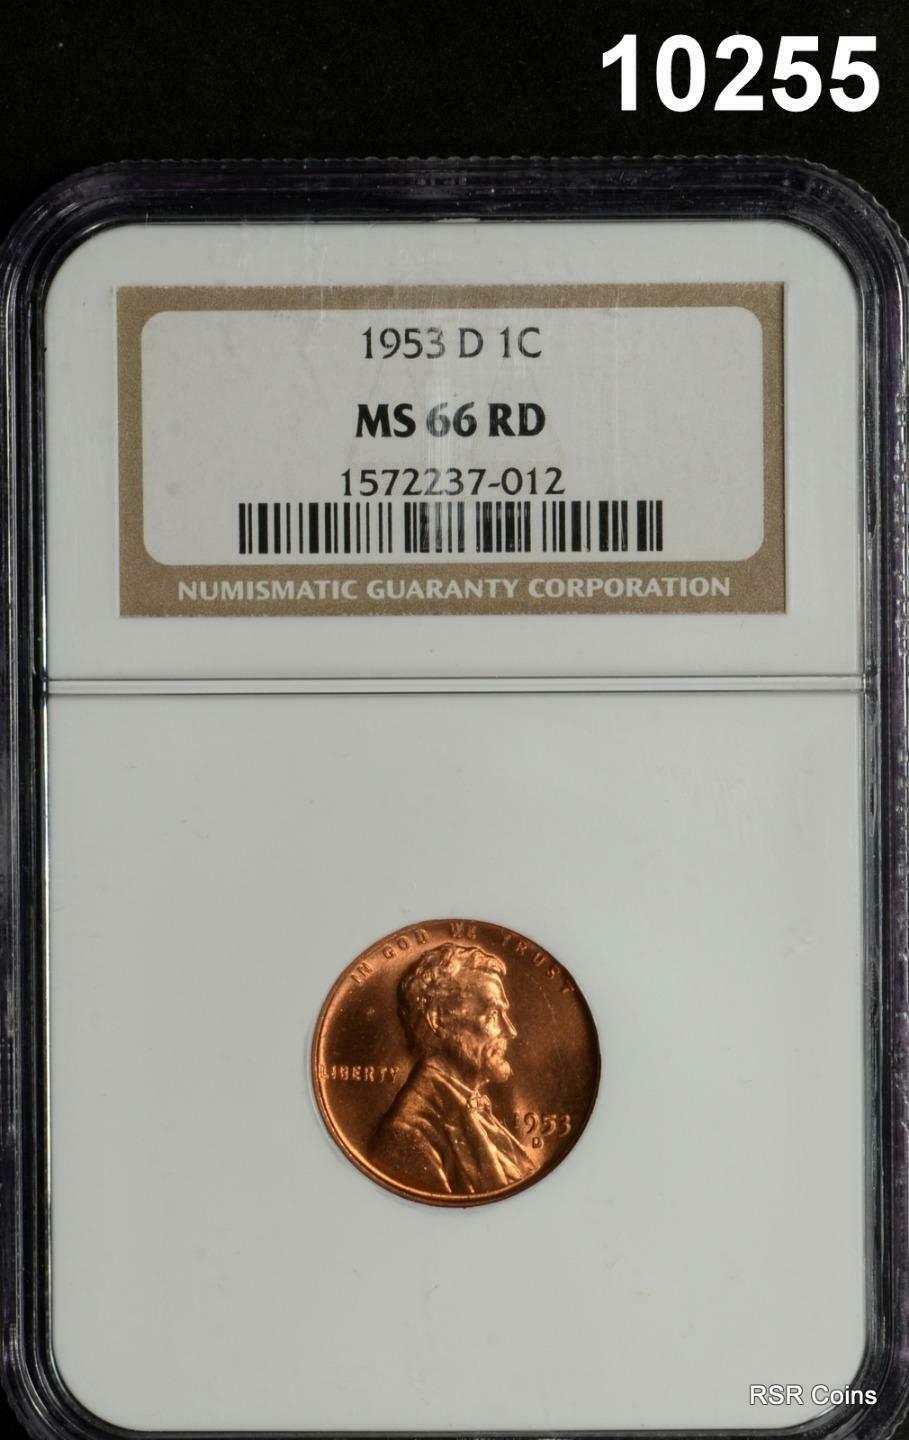 1953 D LINCOLN CENT NGC CERTIFIED MS66 RD SUNSET RED! #10255